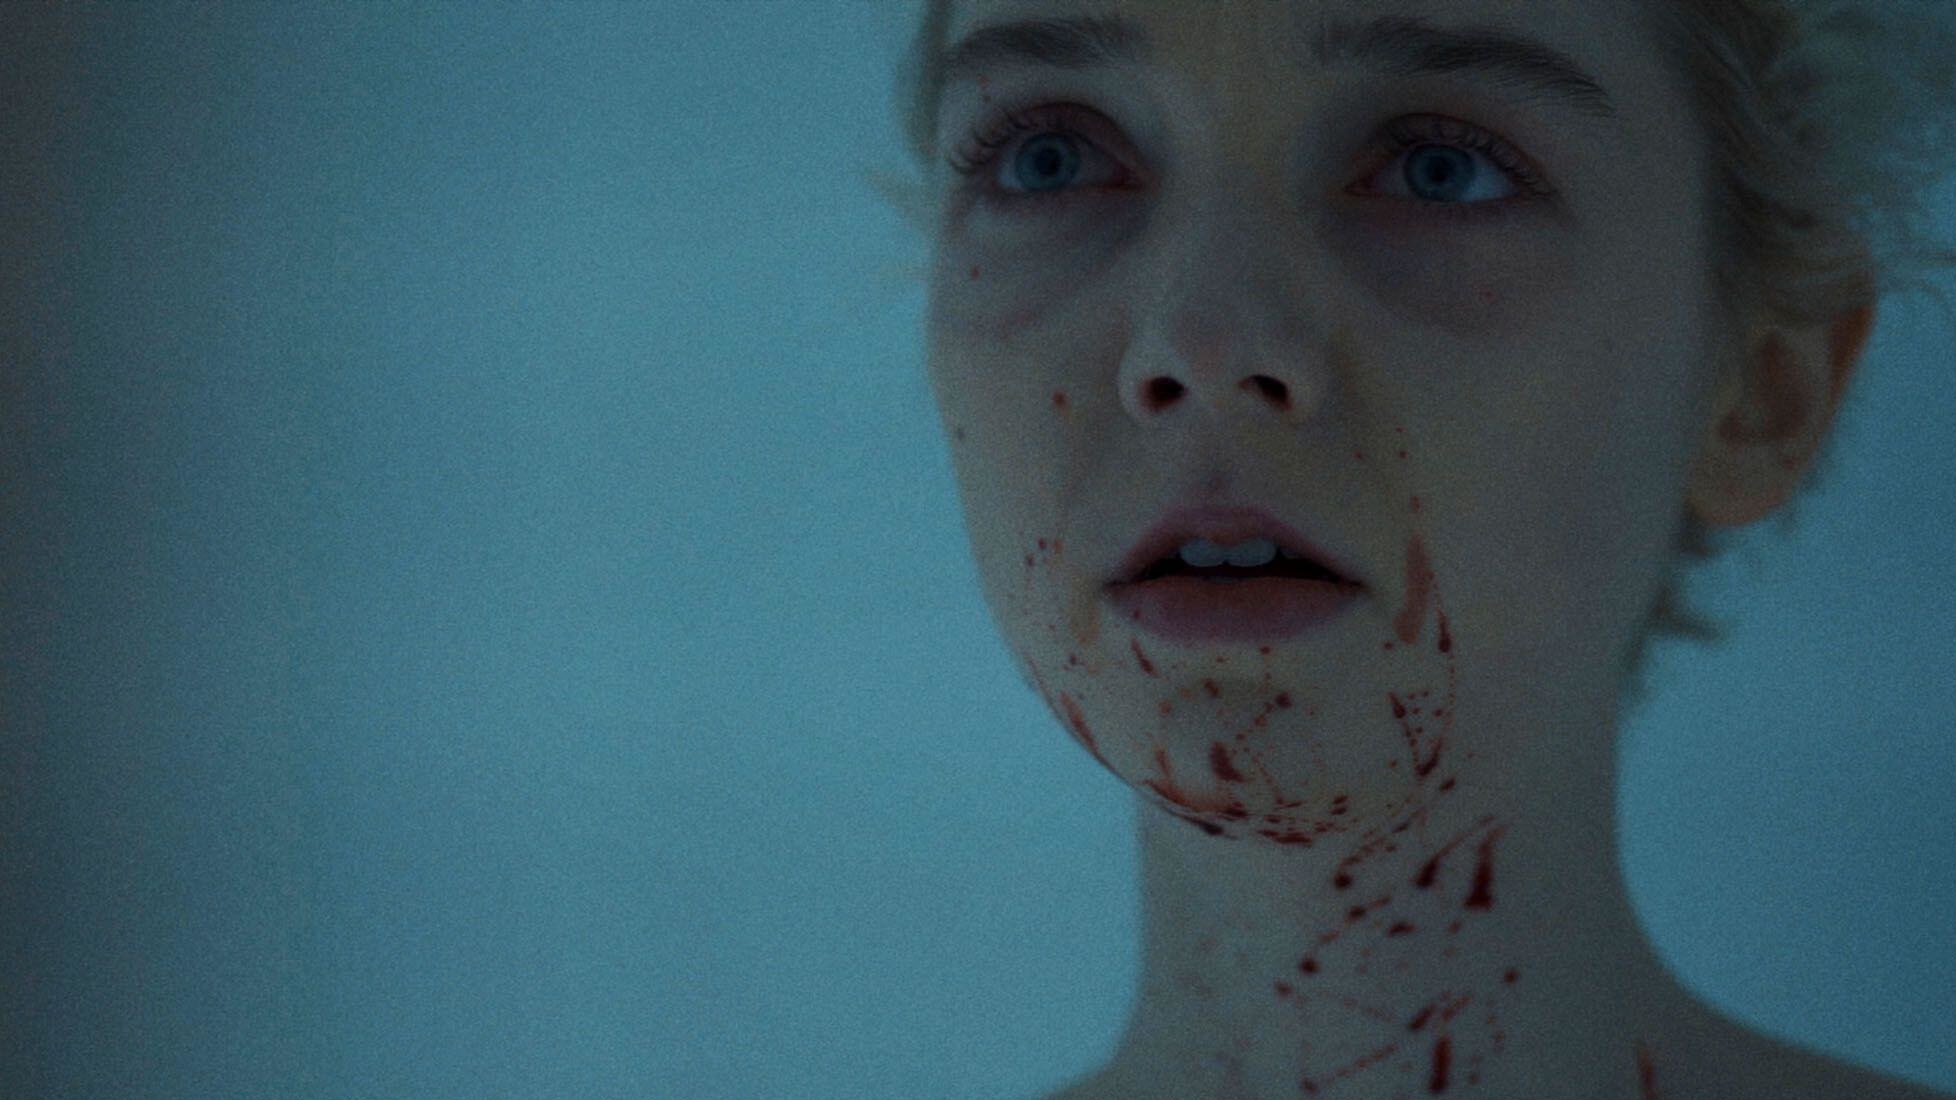 A young woman splattered with blood stares into a mirror in &quot;Come True&quot;